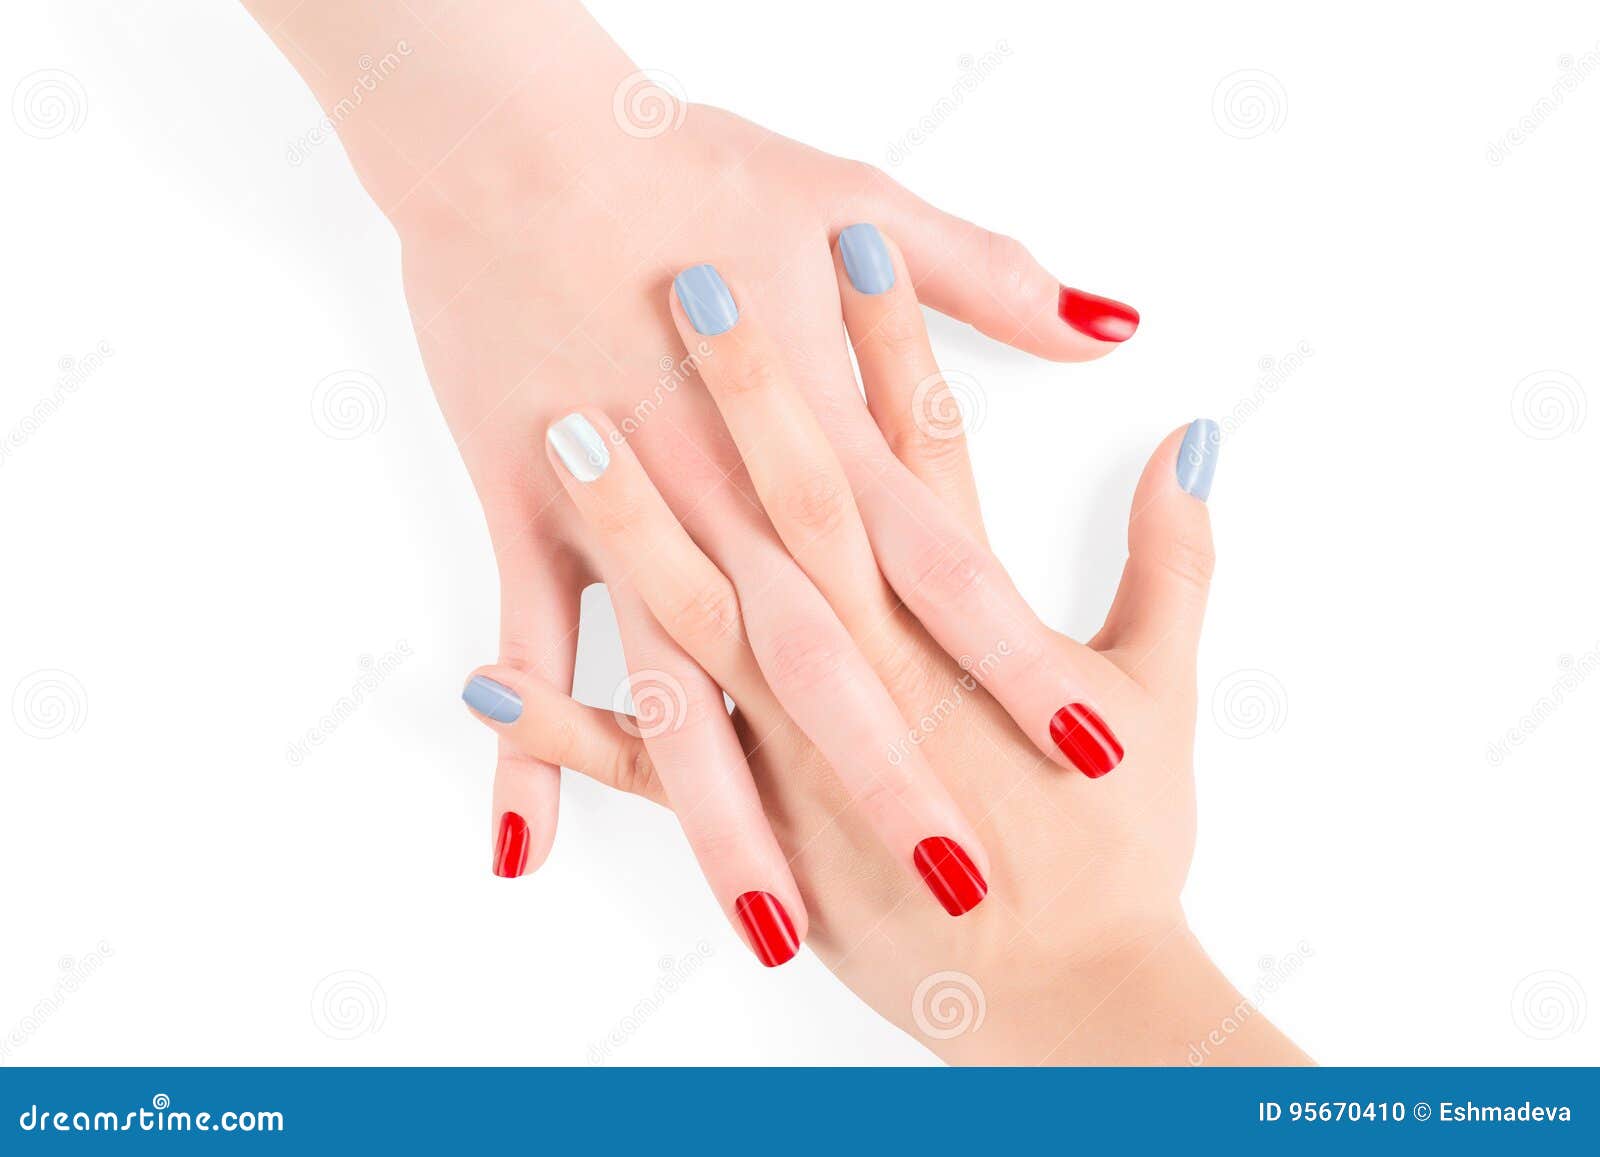 woman connected hands with red and blue shellac nail polish